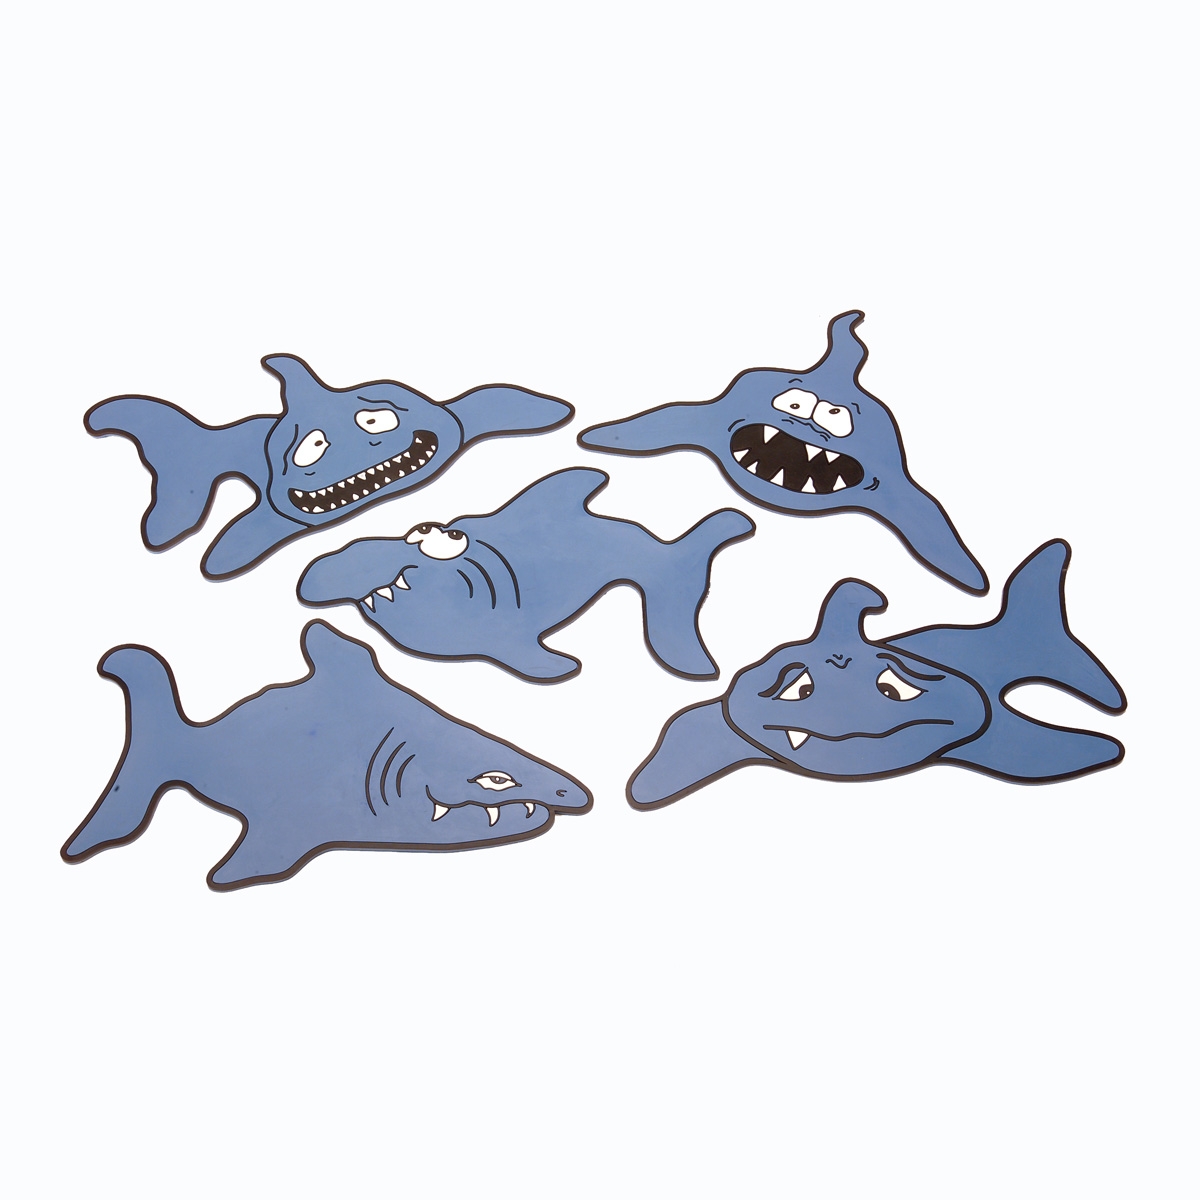 poly spot sharks set of 5 floor markers